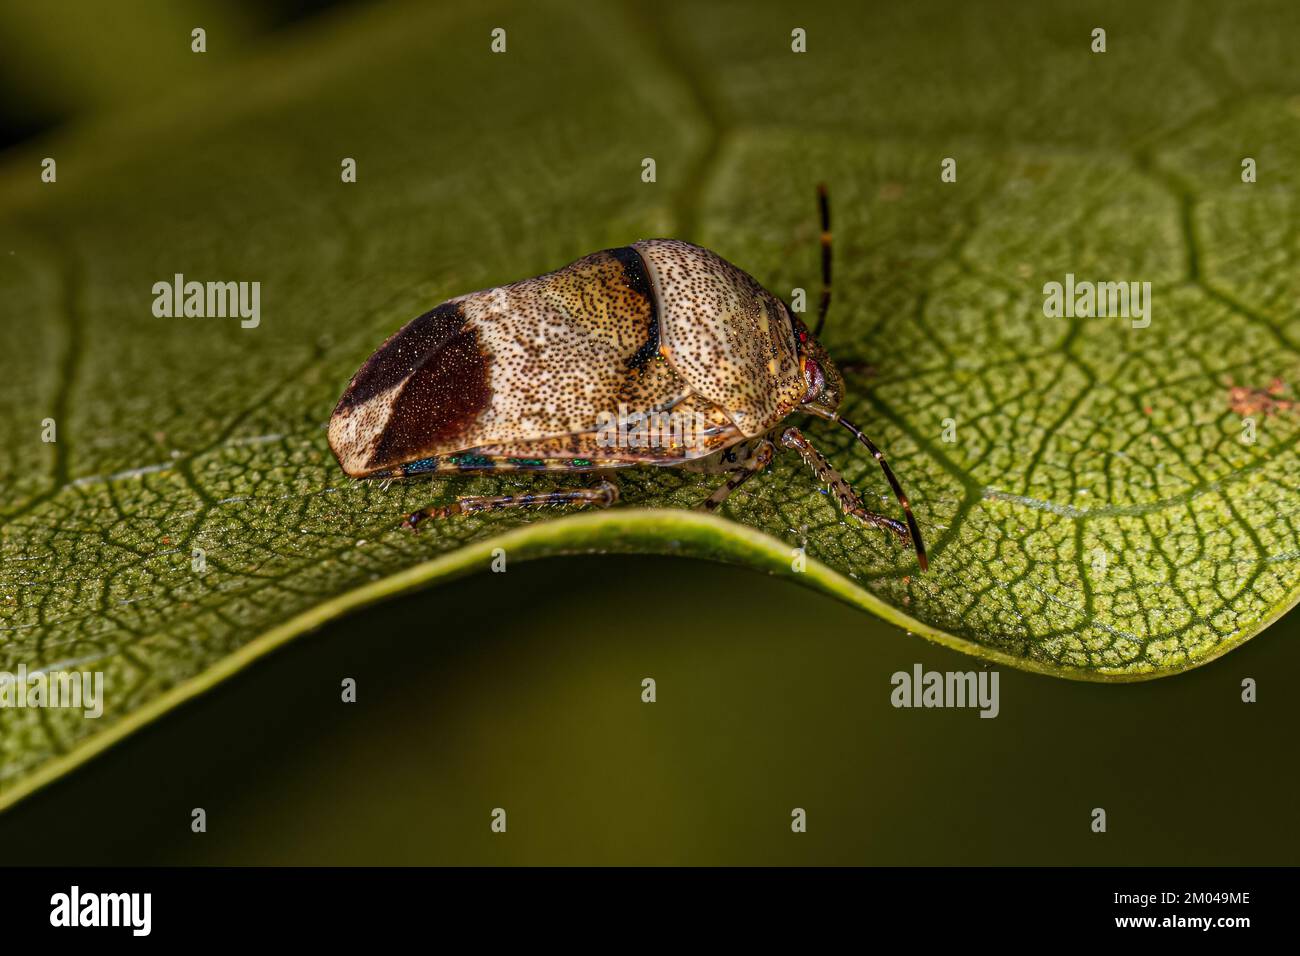 Adult Jewel Bug of the Family Scutelleridae Stock Photo